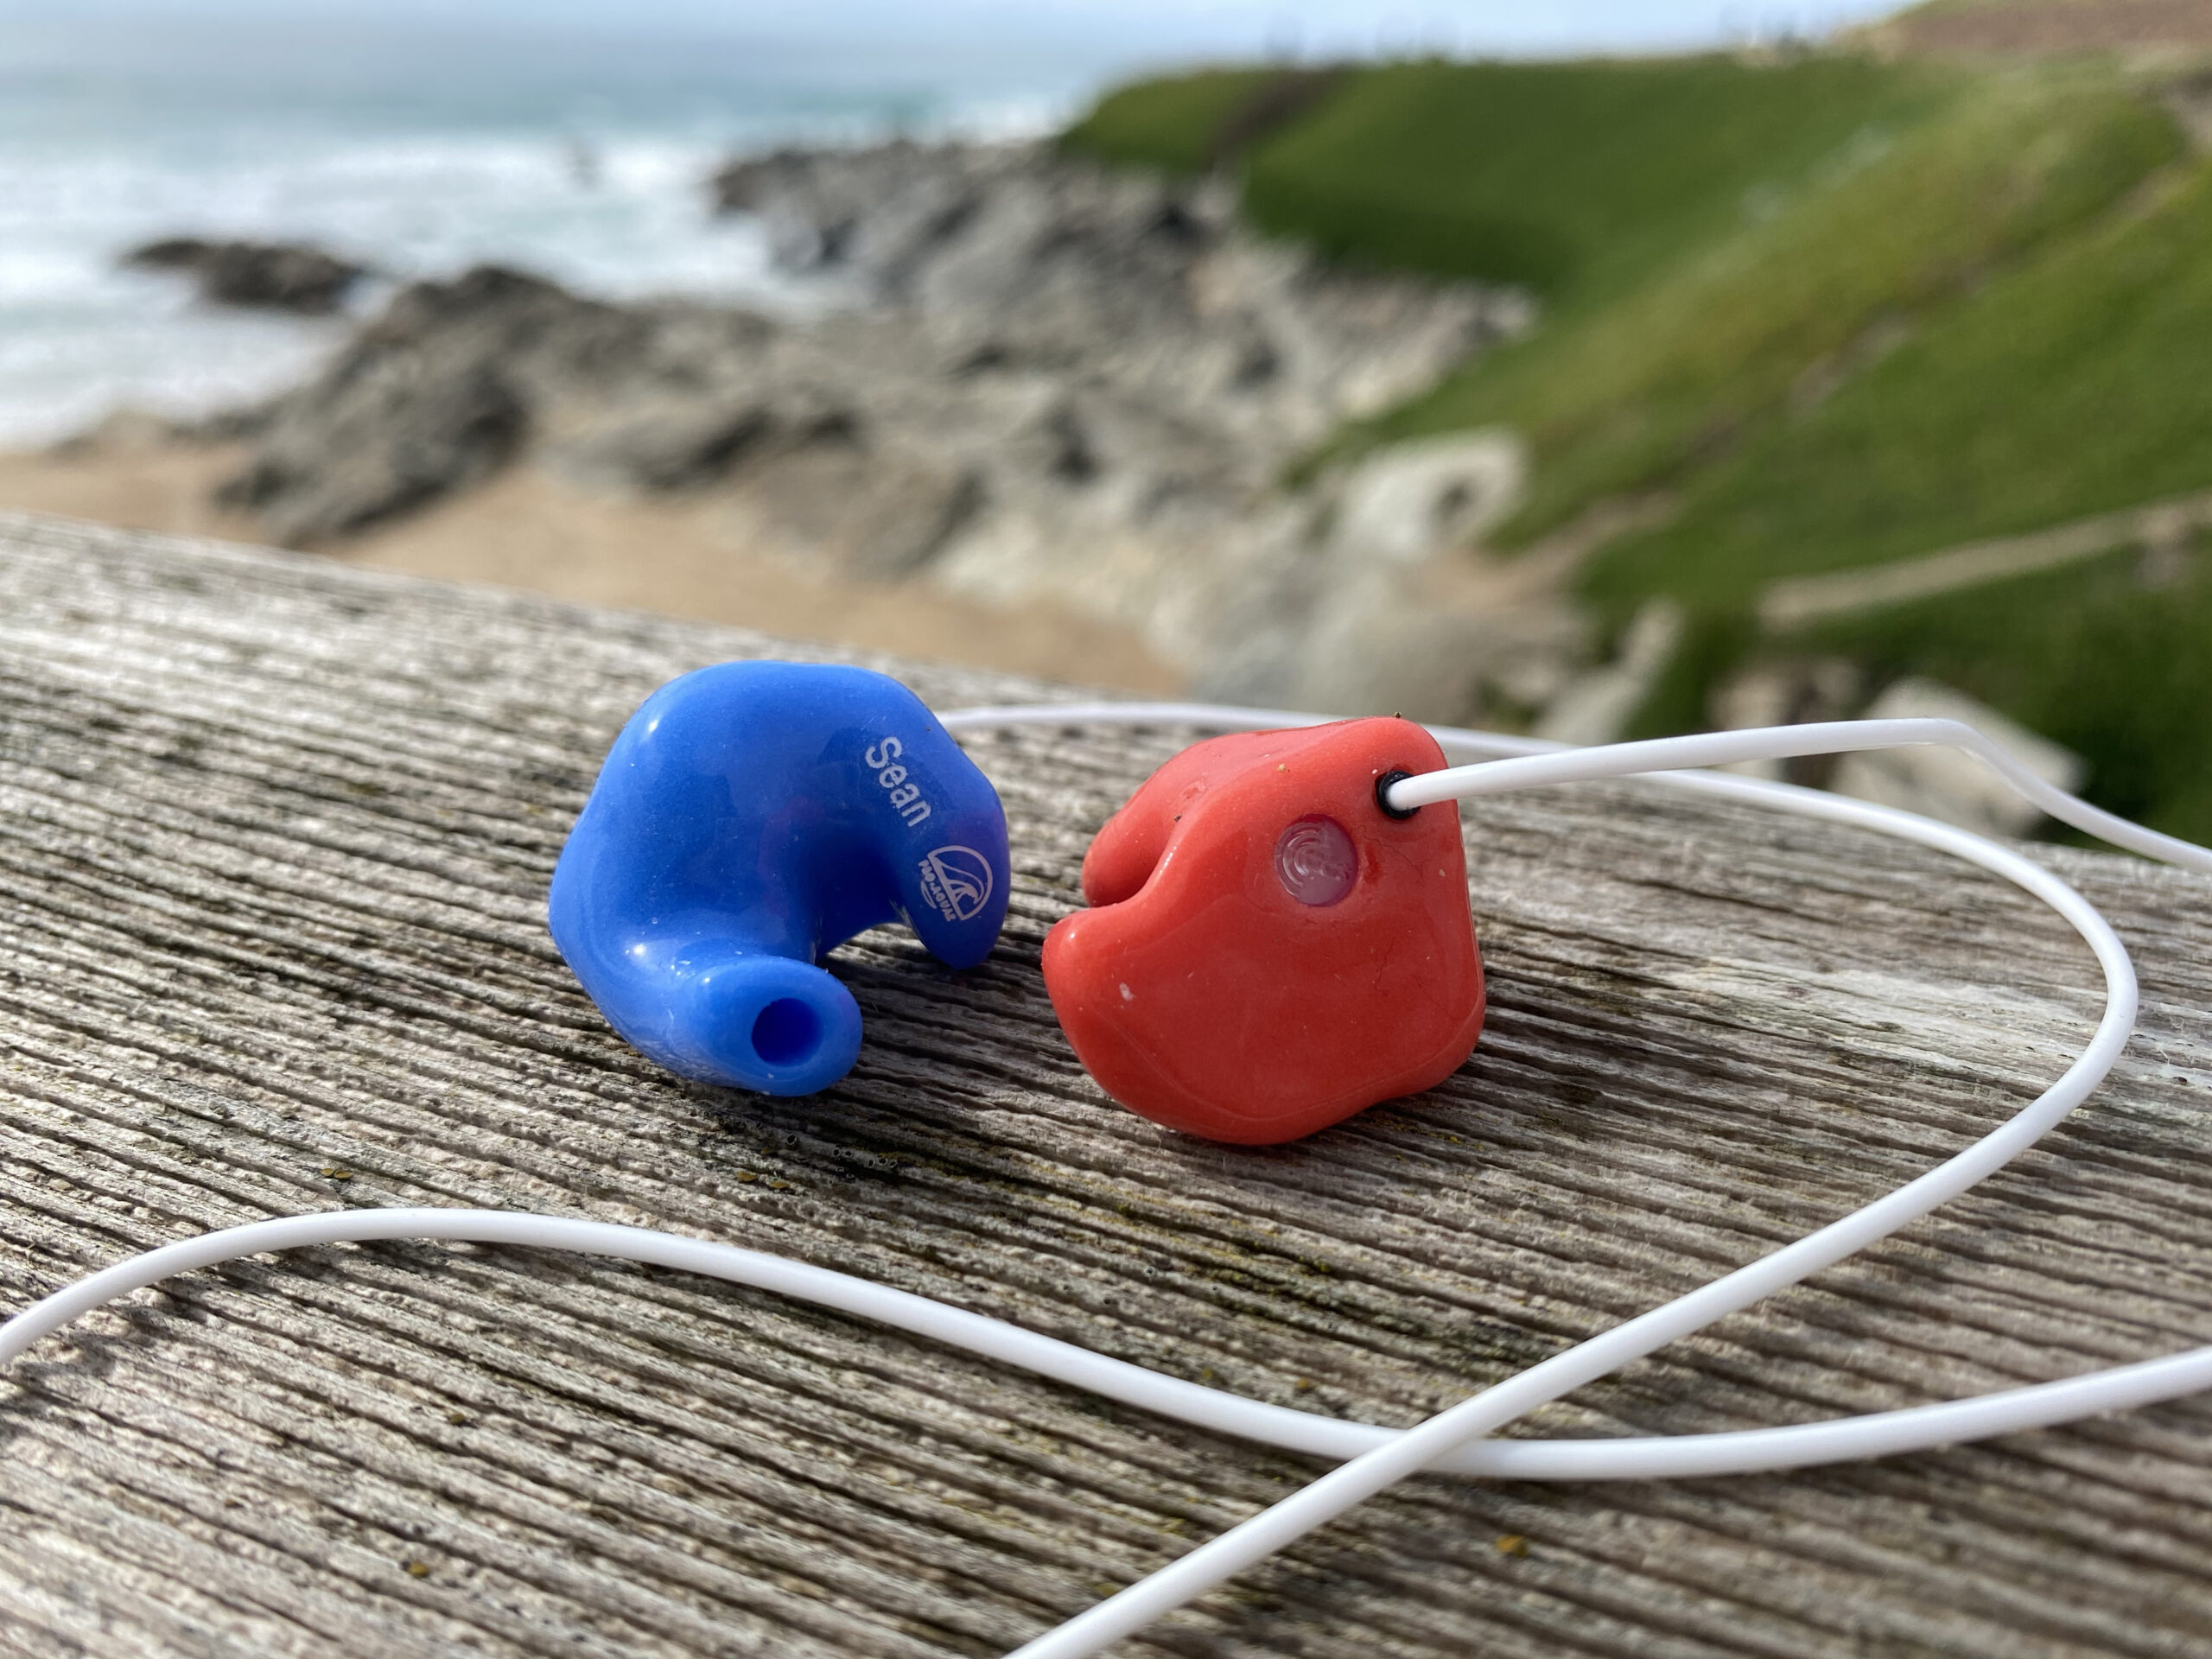 Water sports hearing protection by Pro-Aquaz